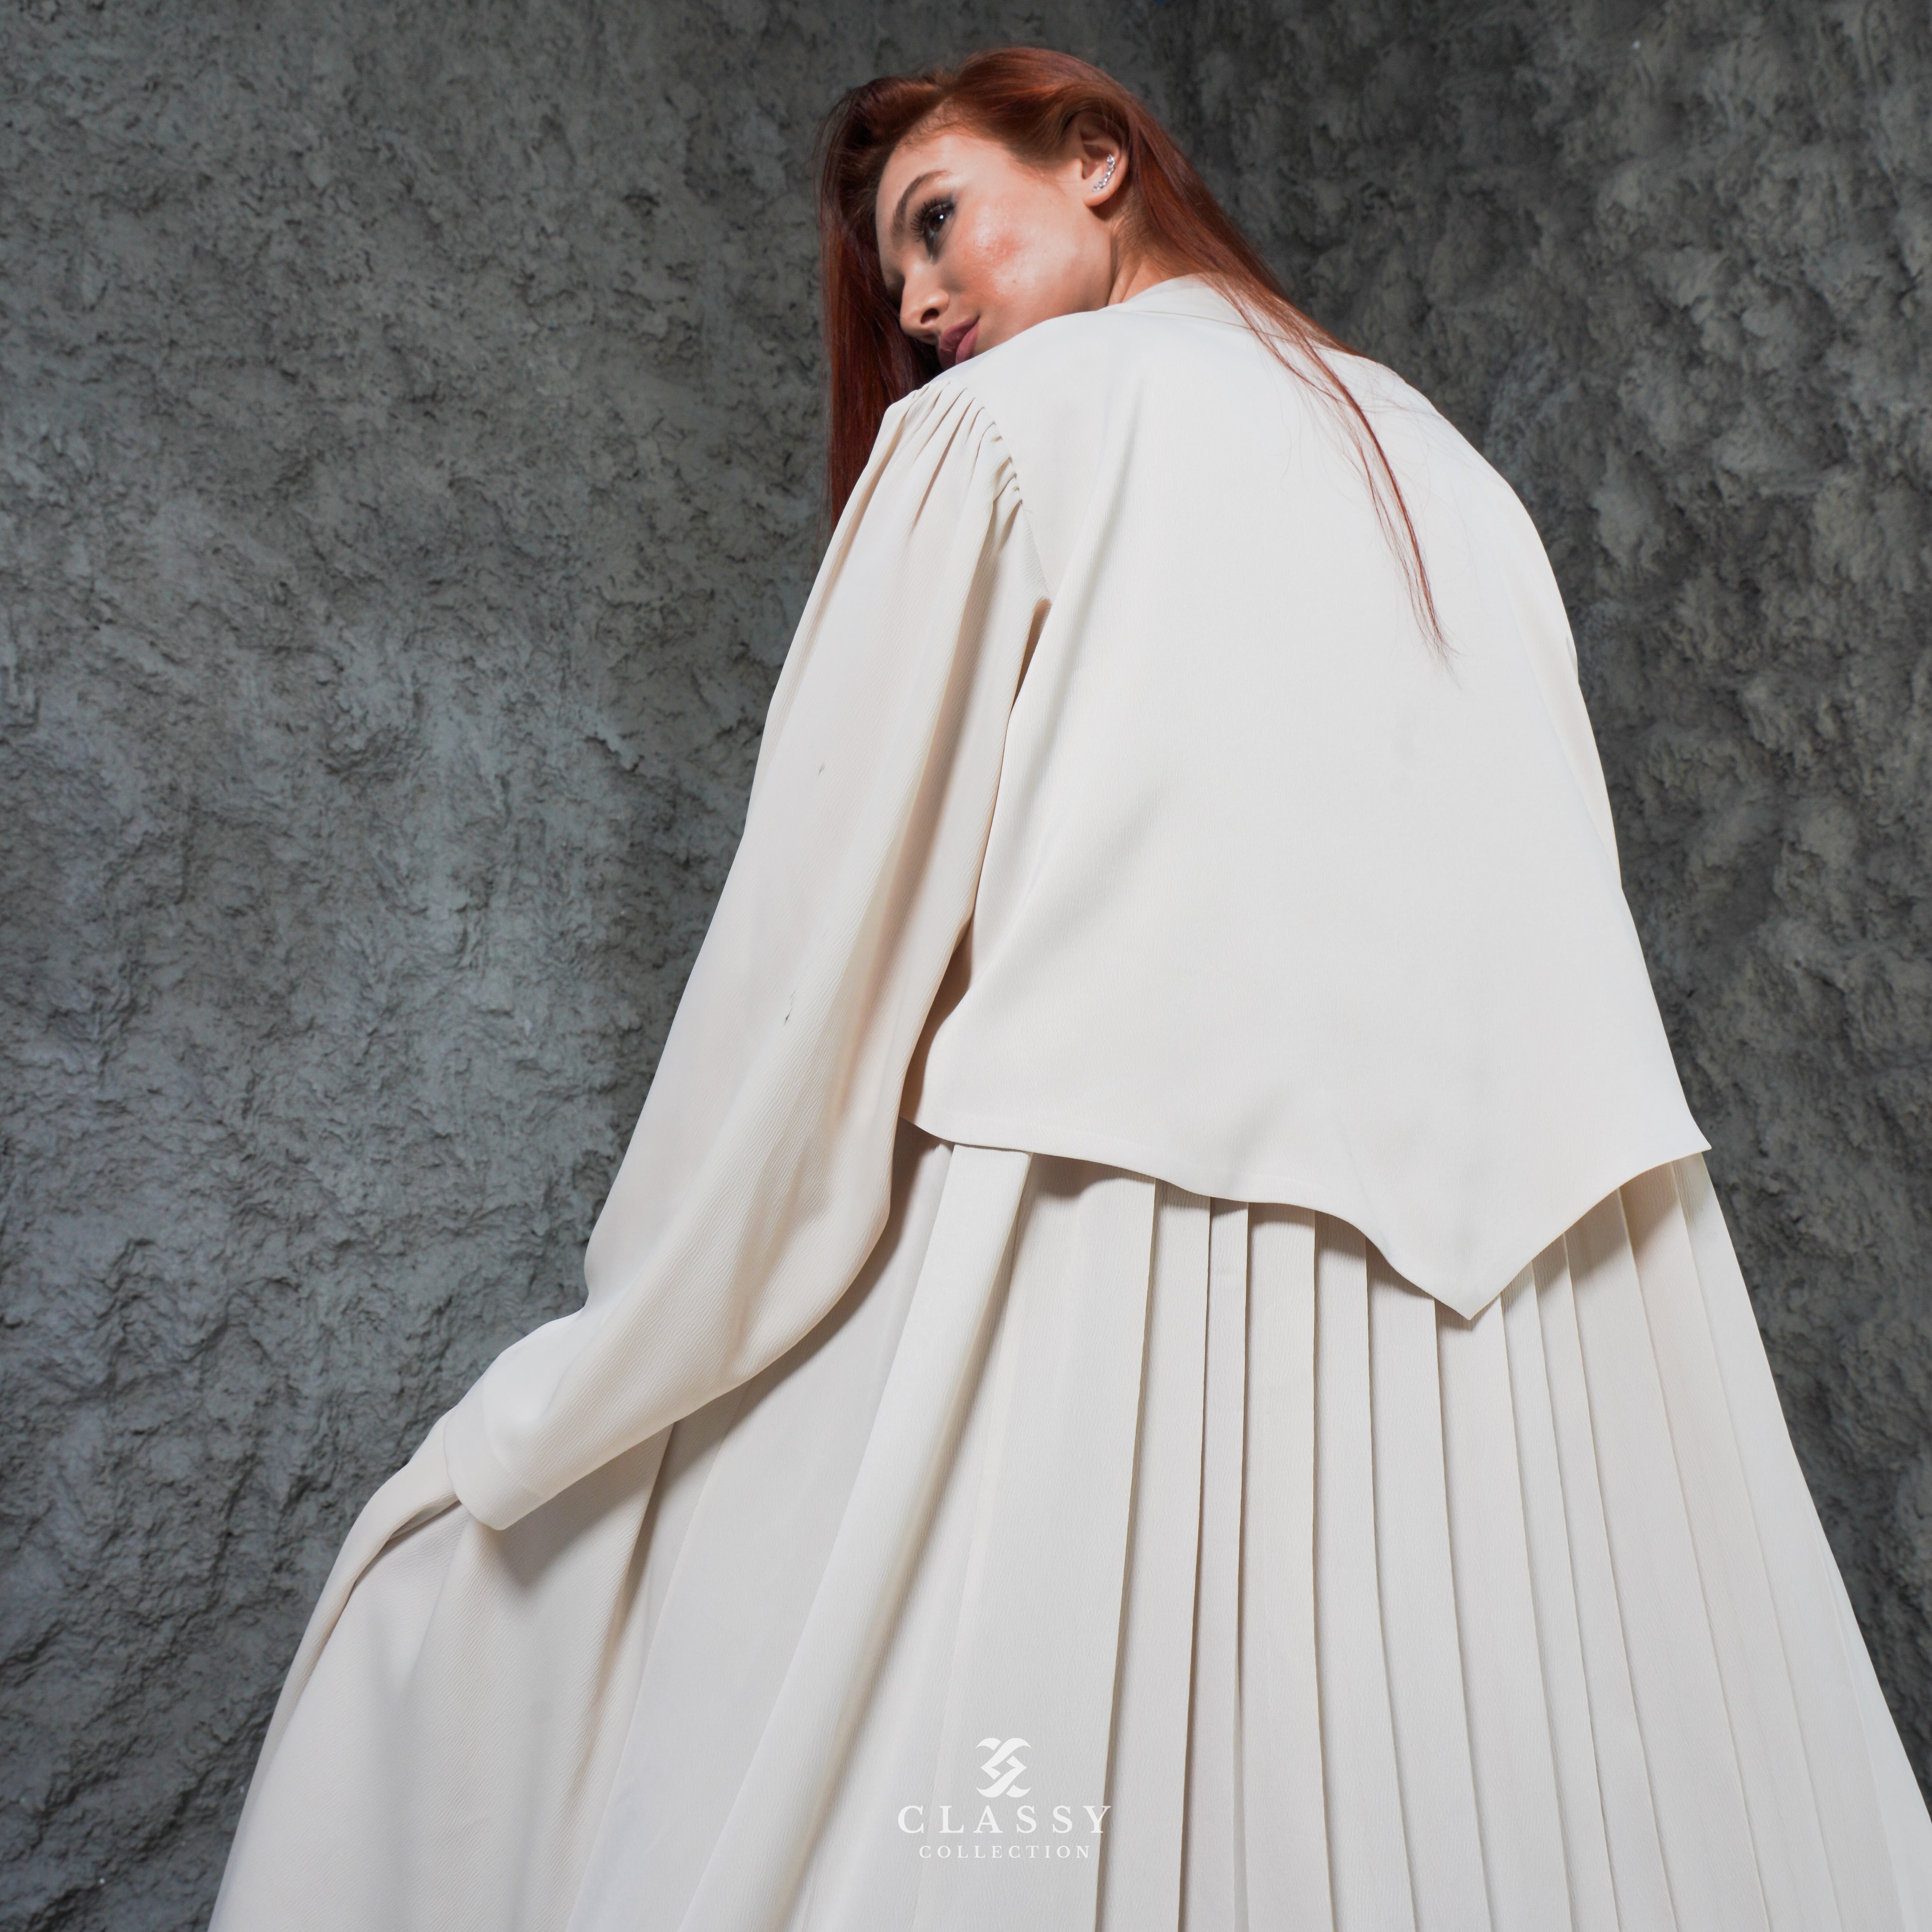 BEIGE CREPE FABRIC ABAYA WITH SPECIAL BACK CUT